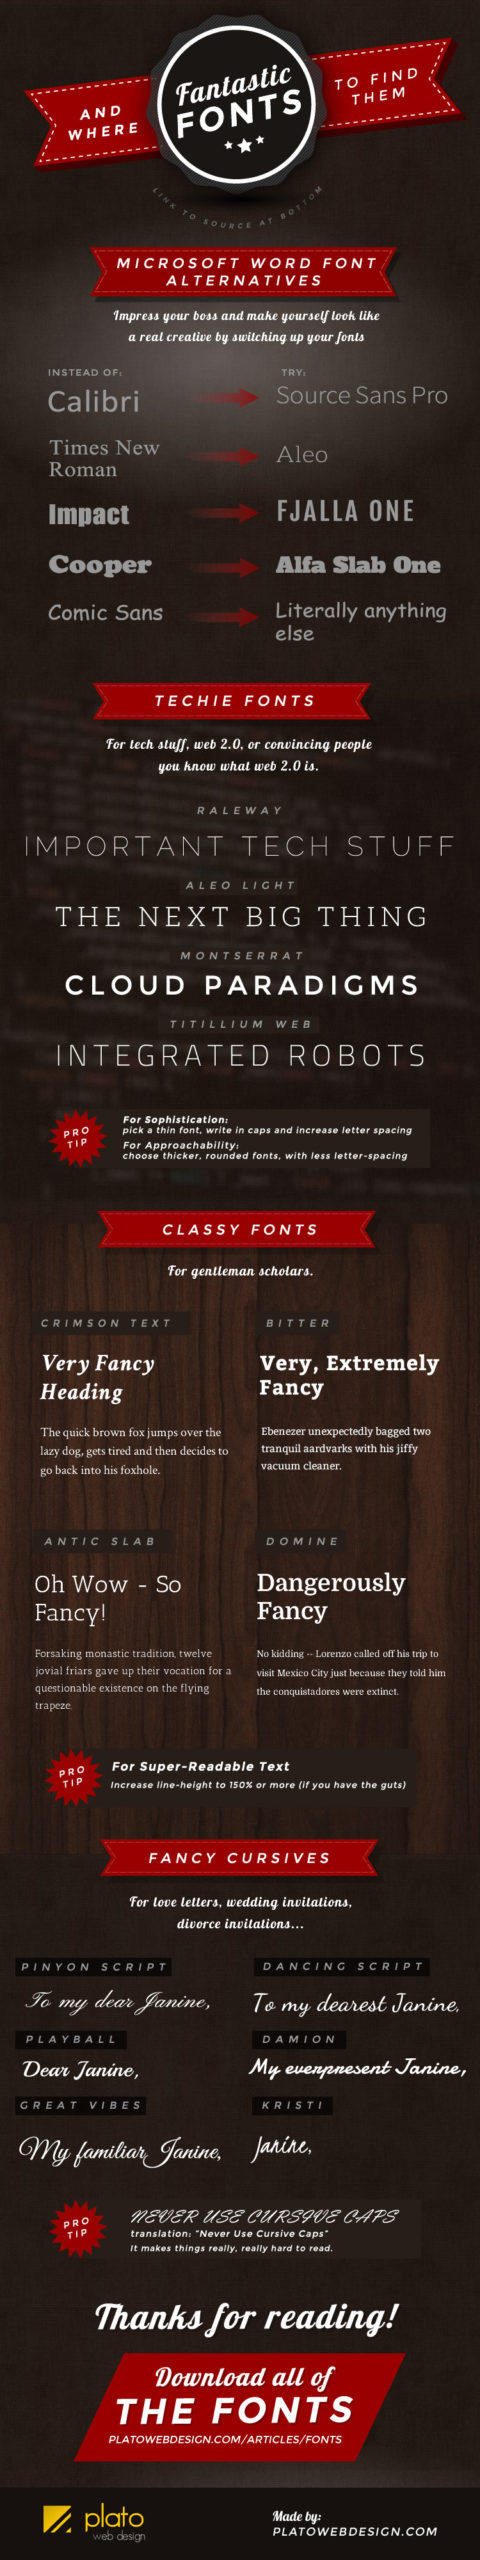 This Infographic Suggests Good-Looking Fonts To Replace Dull, Overused Ones